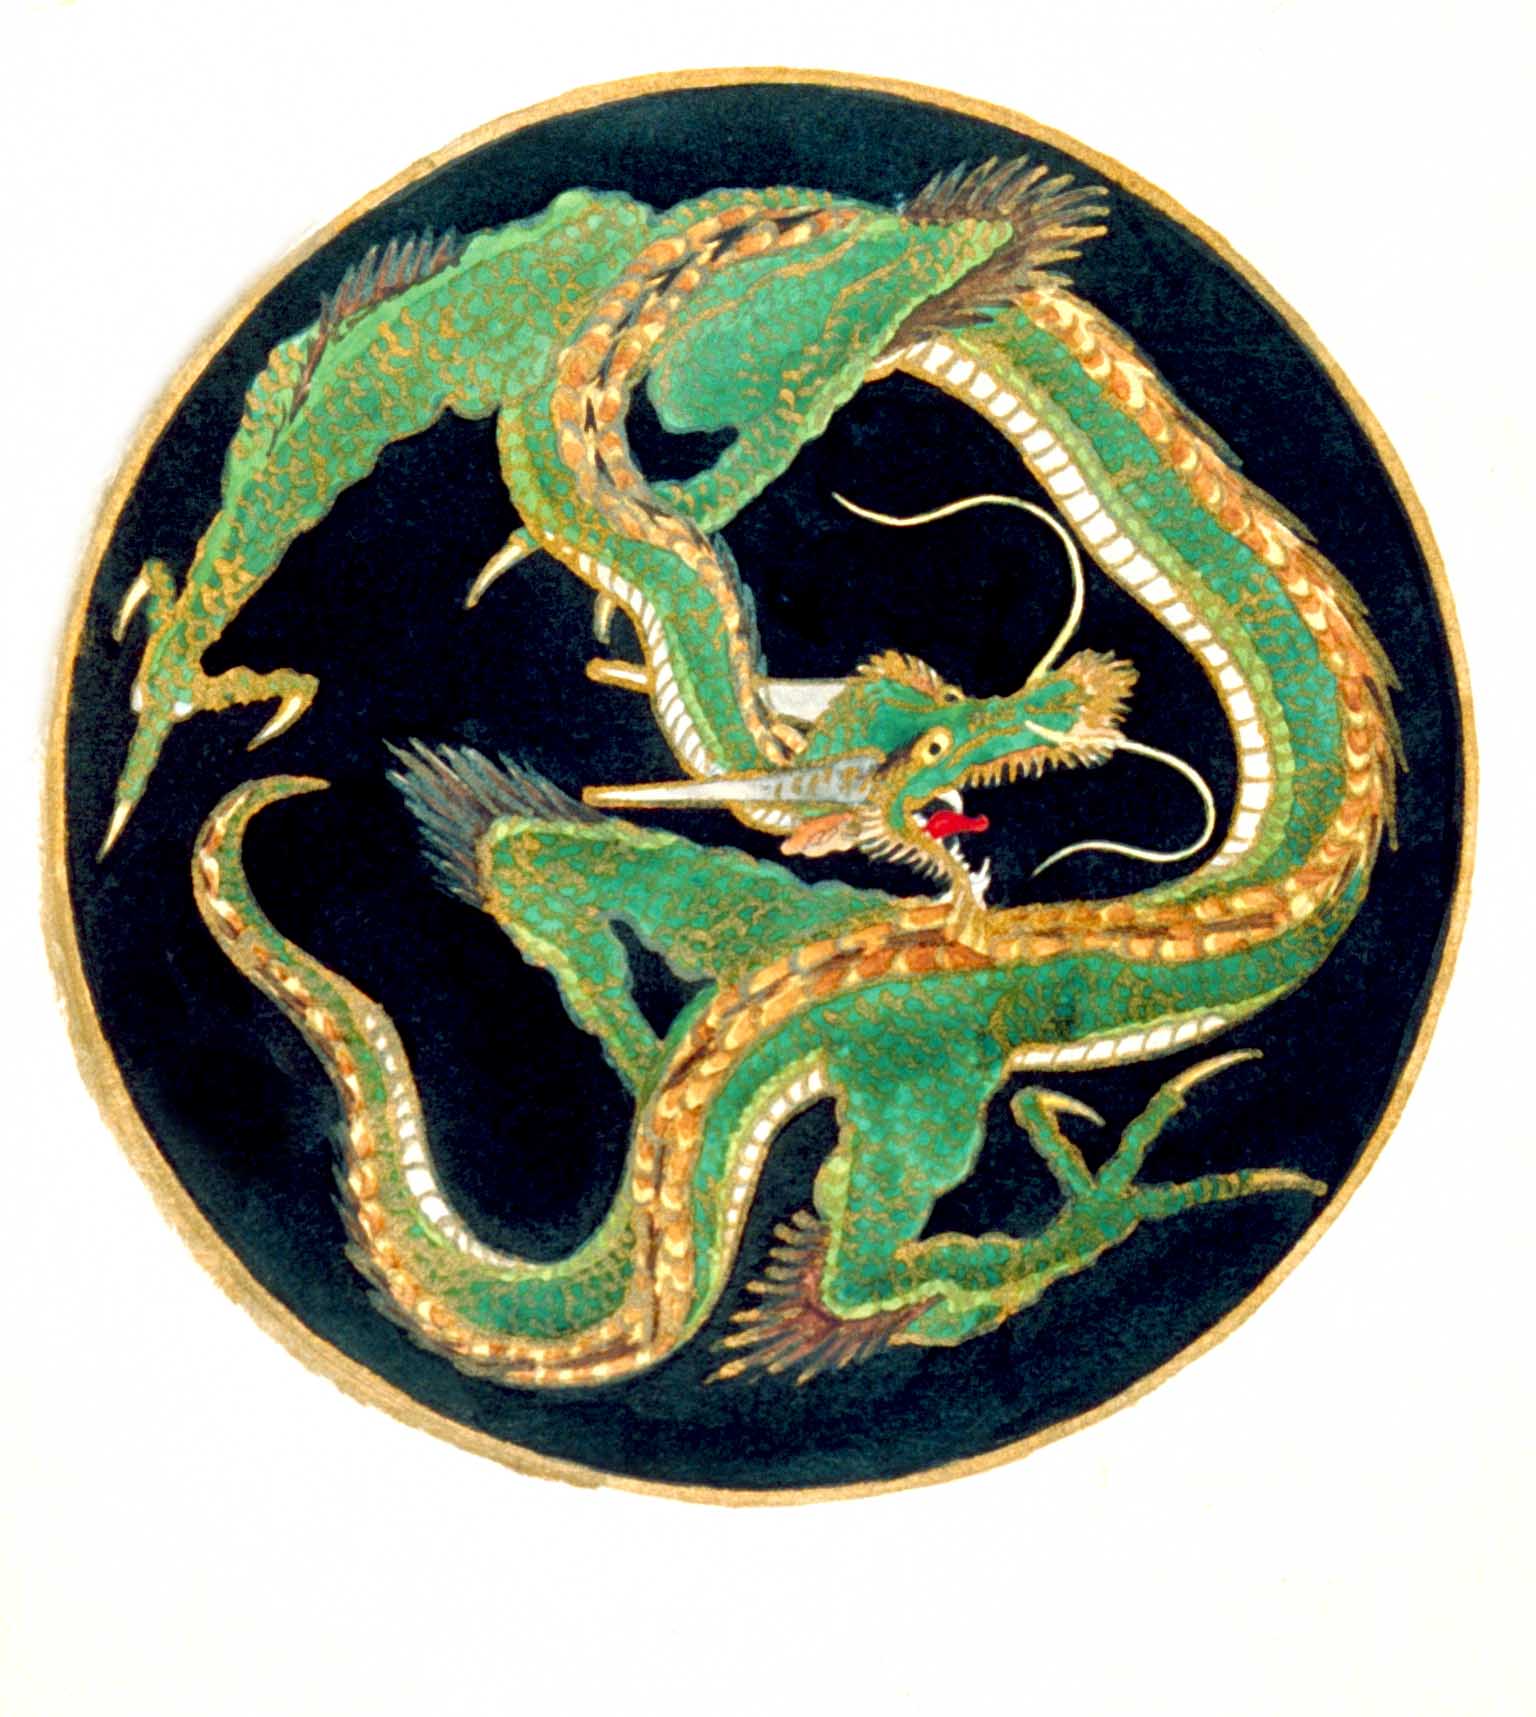 Three clawed Japanese dragon decorates copy of a plaque of cloisonne enamel in the British Museum. (Time Life Pictures&mdash;The LIFE Picture Collection/Getty Images)